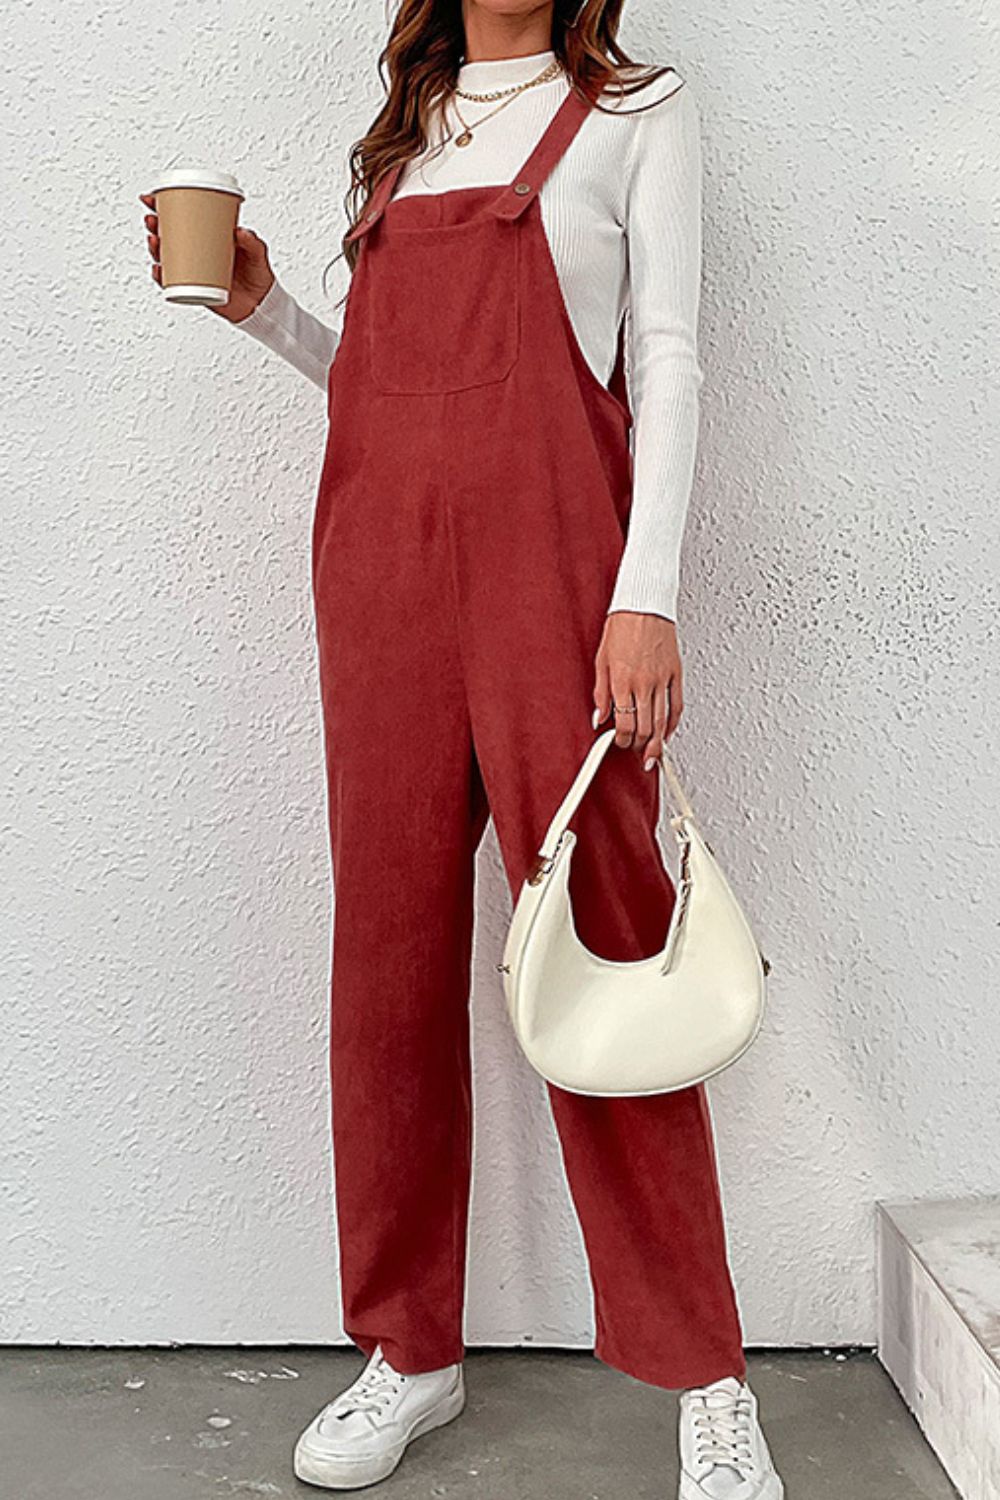 Red Buttoned Corduroy Overalls